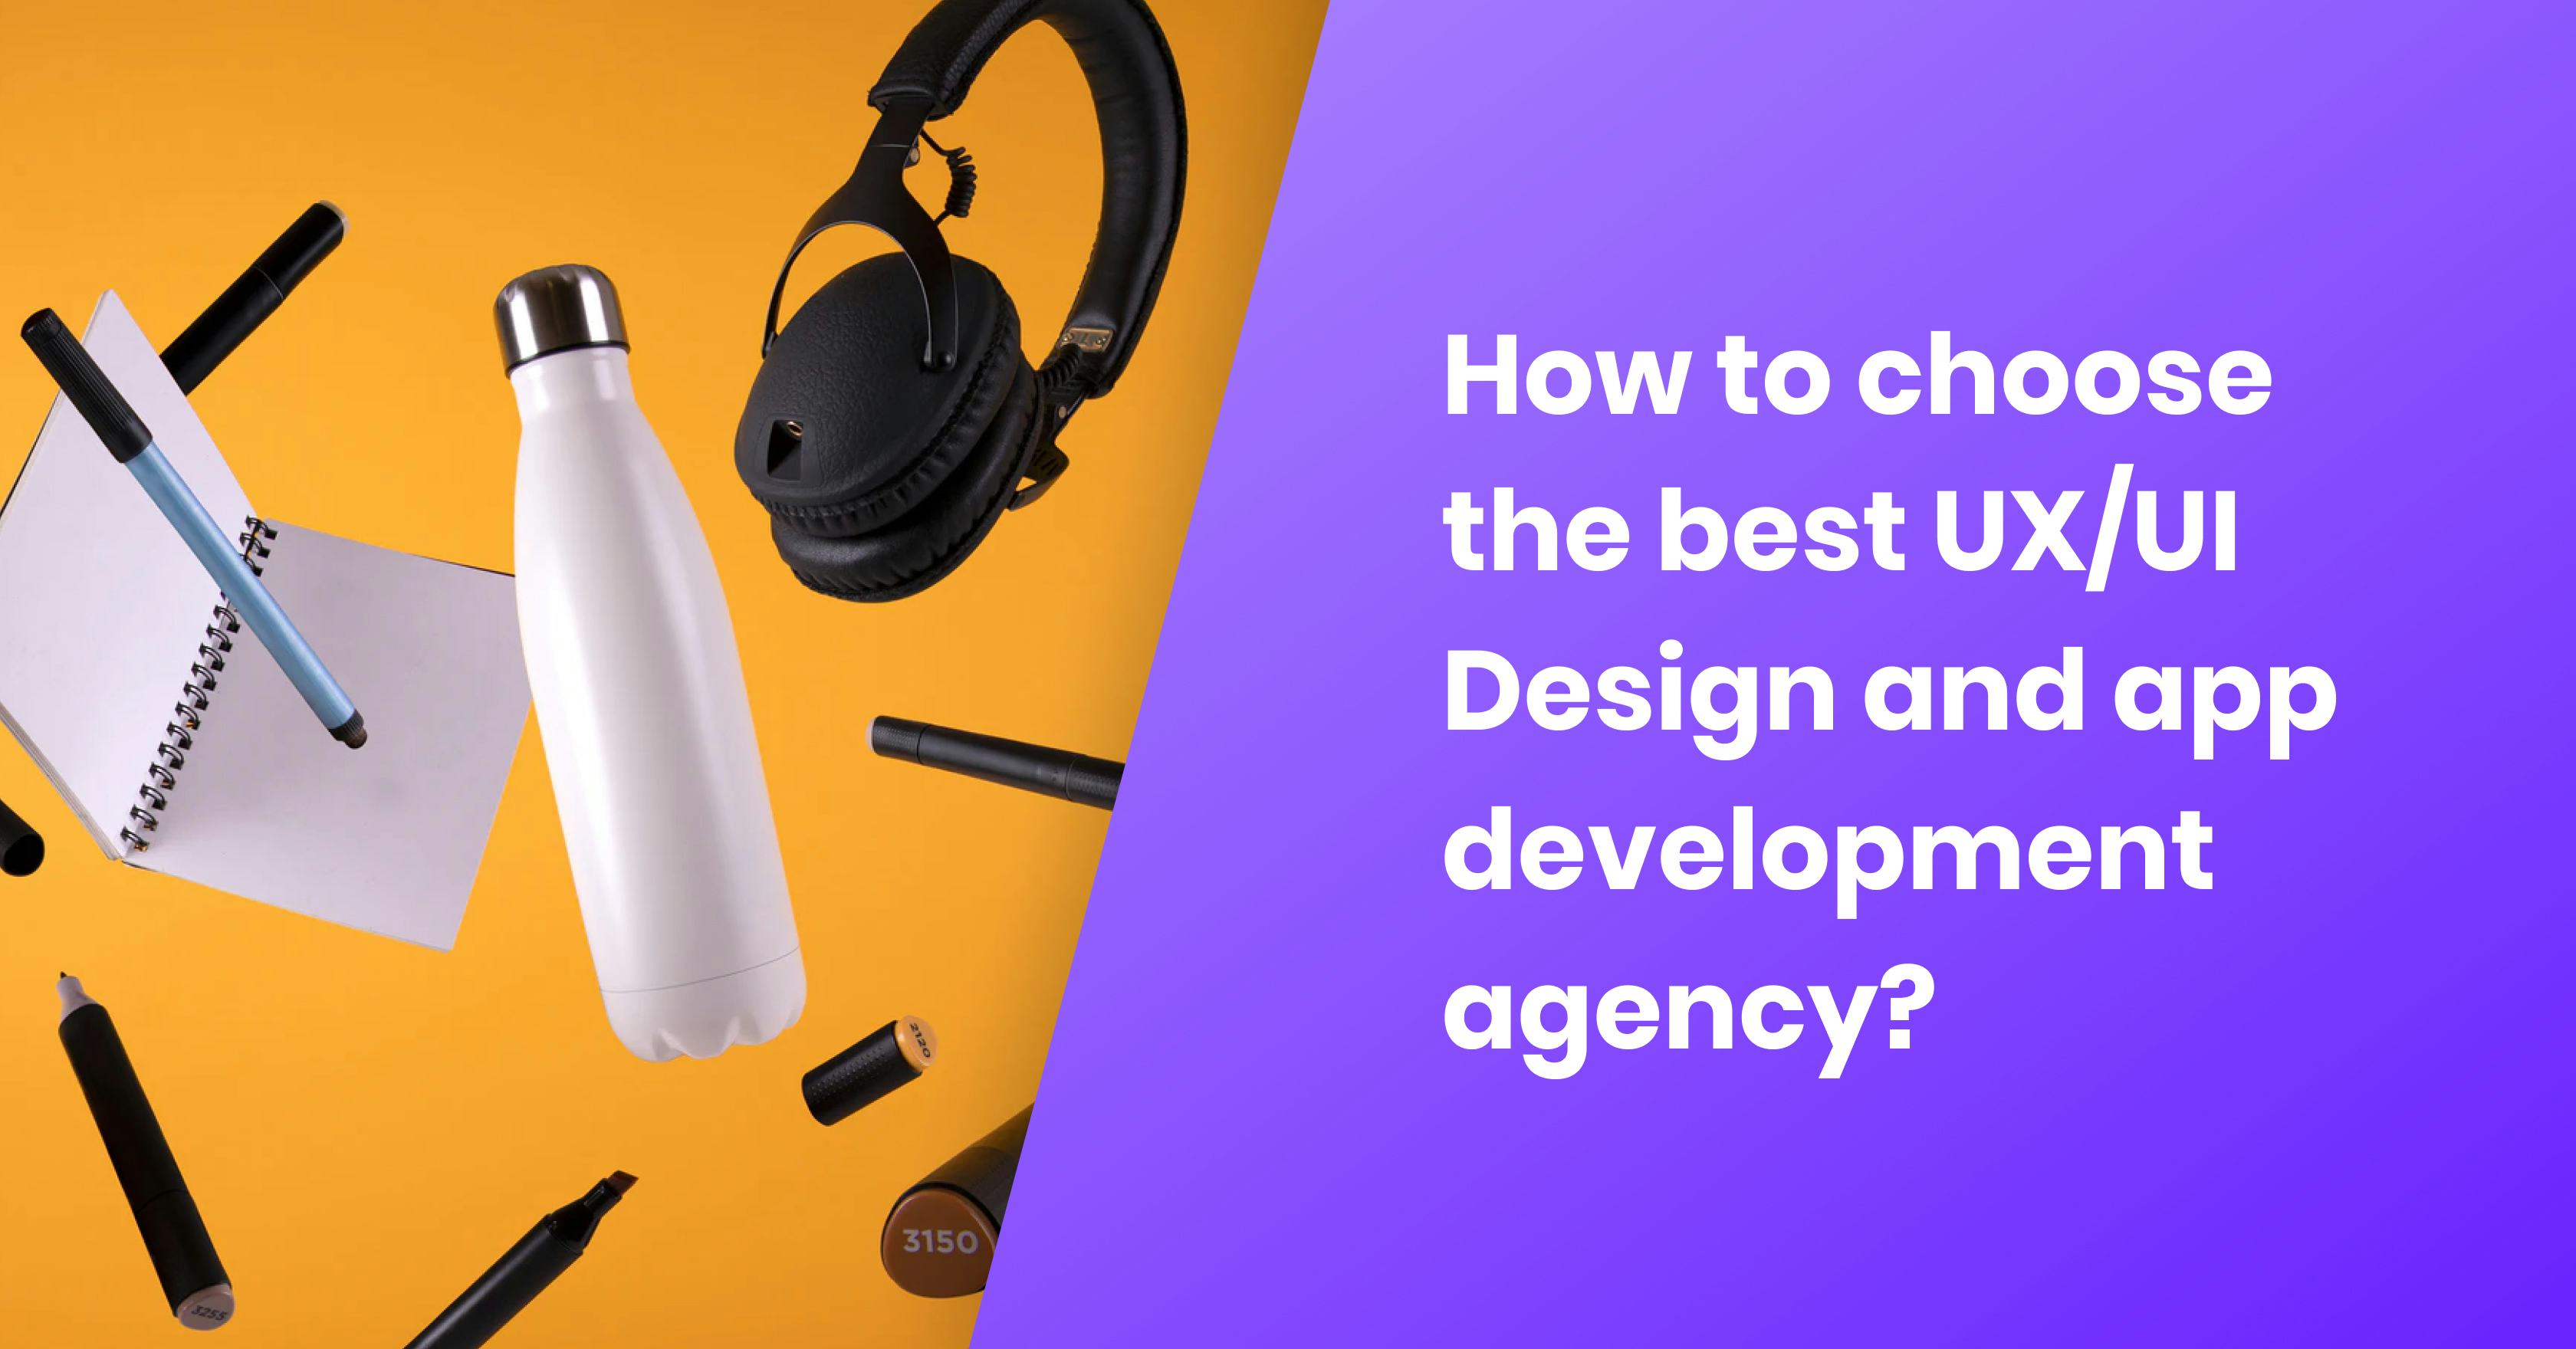 Nightborn - How to choose the best UX/UI design and app development agency?